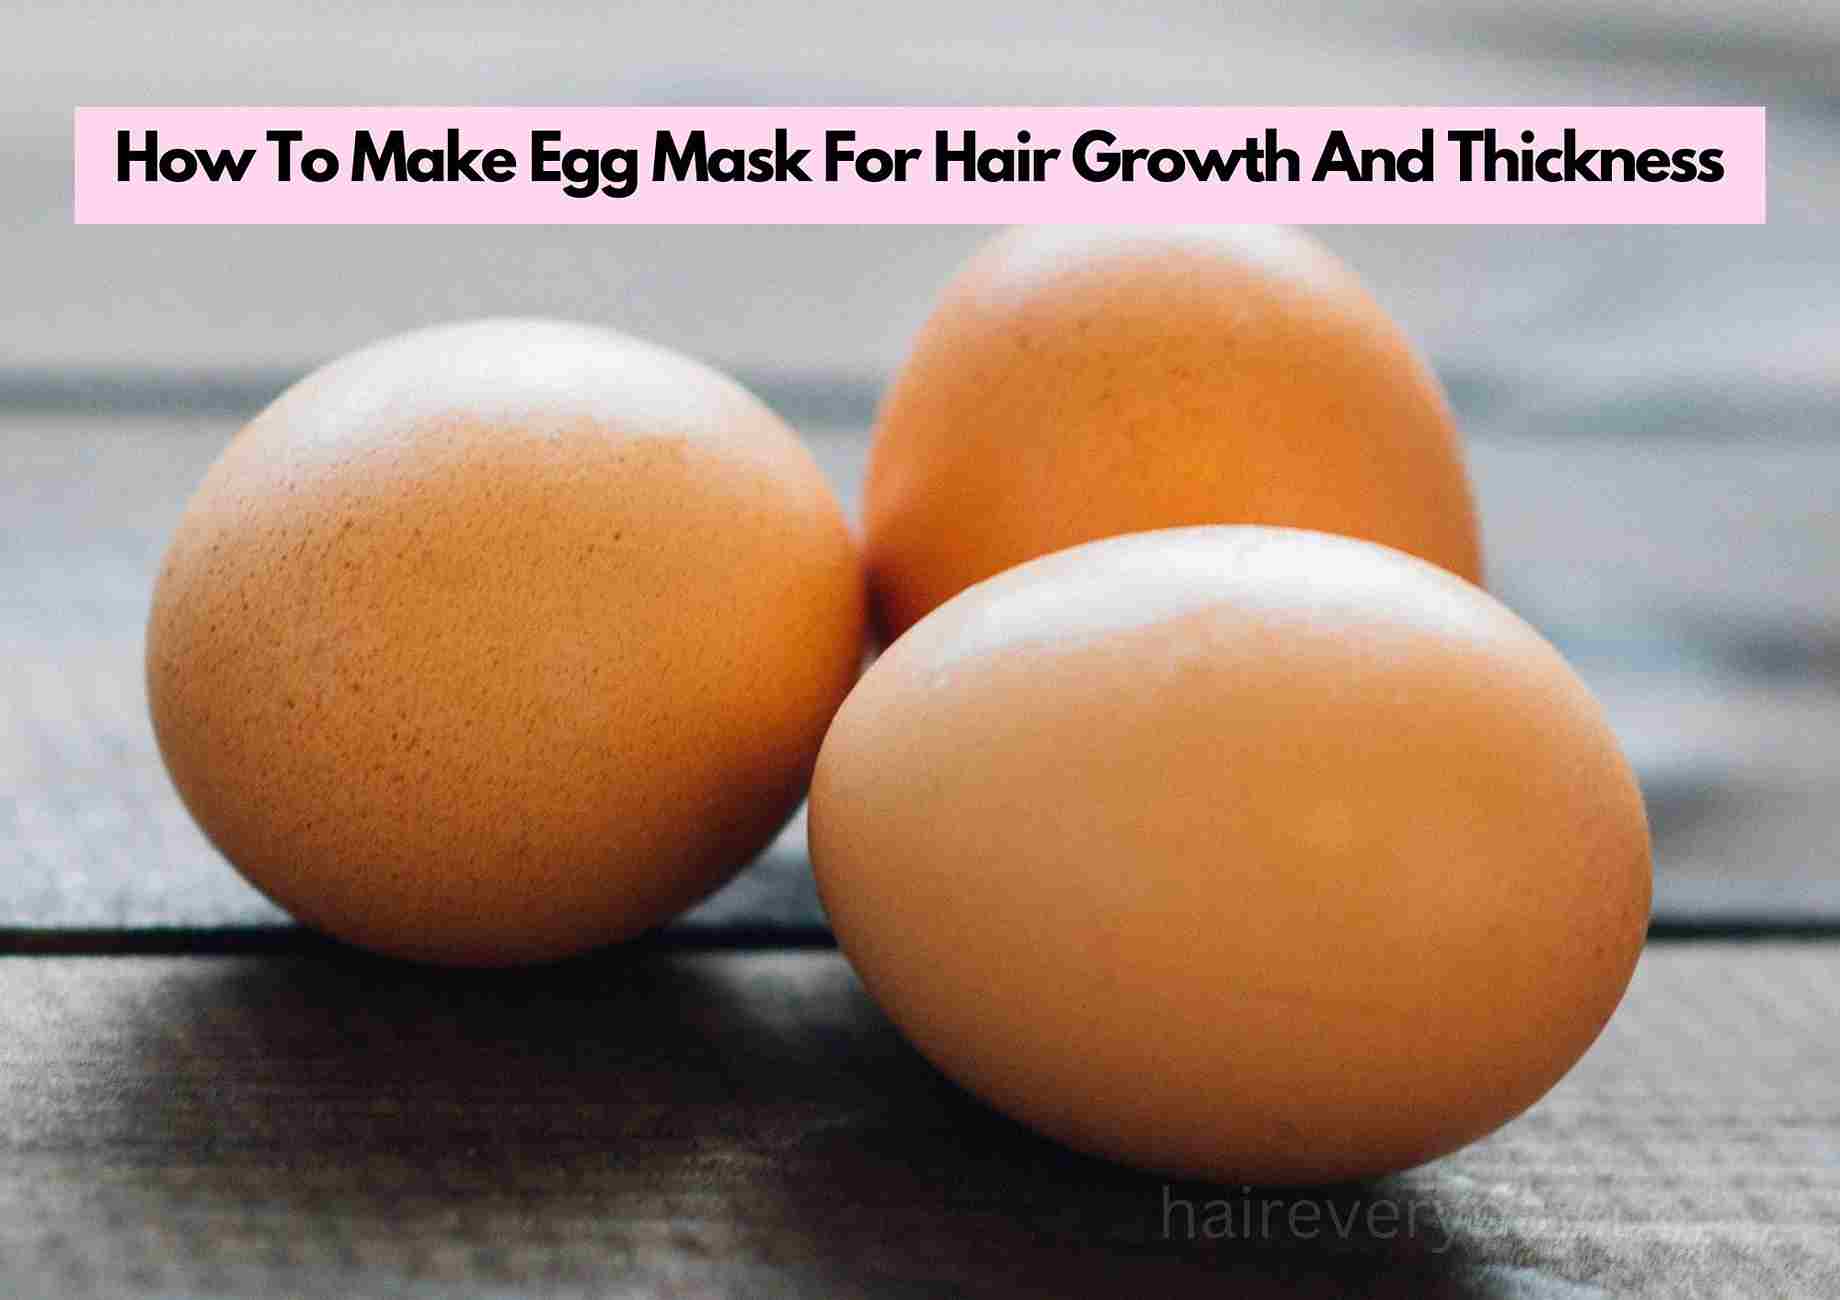 EGG HAIR MASK FOR EXTREME HAIR GROWTH  My egg hair wash routine  YouTube